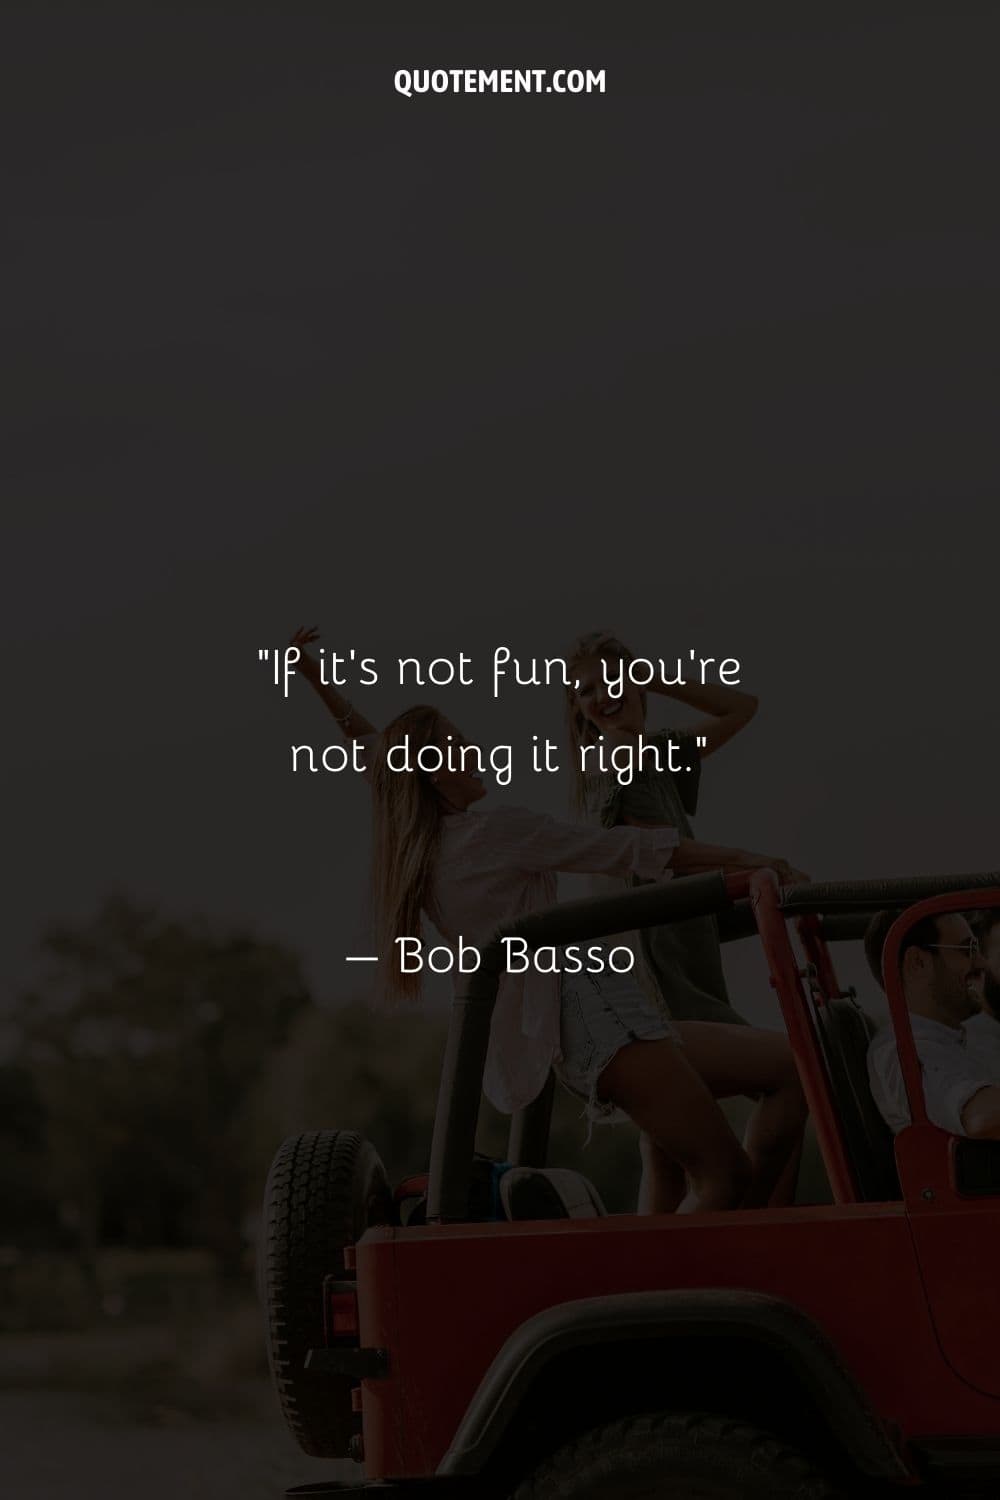 If it’s not fun, you’re not doing it right.